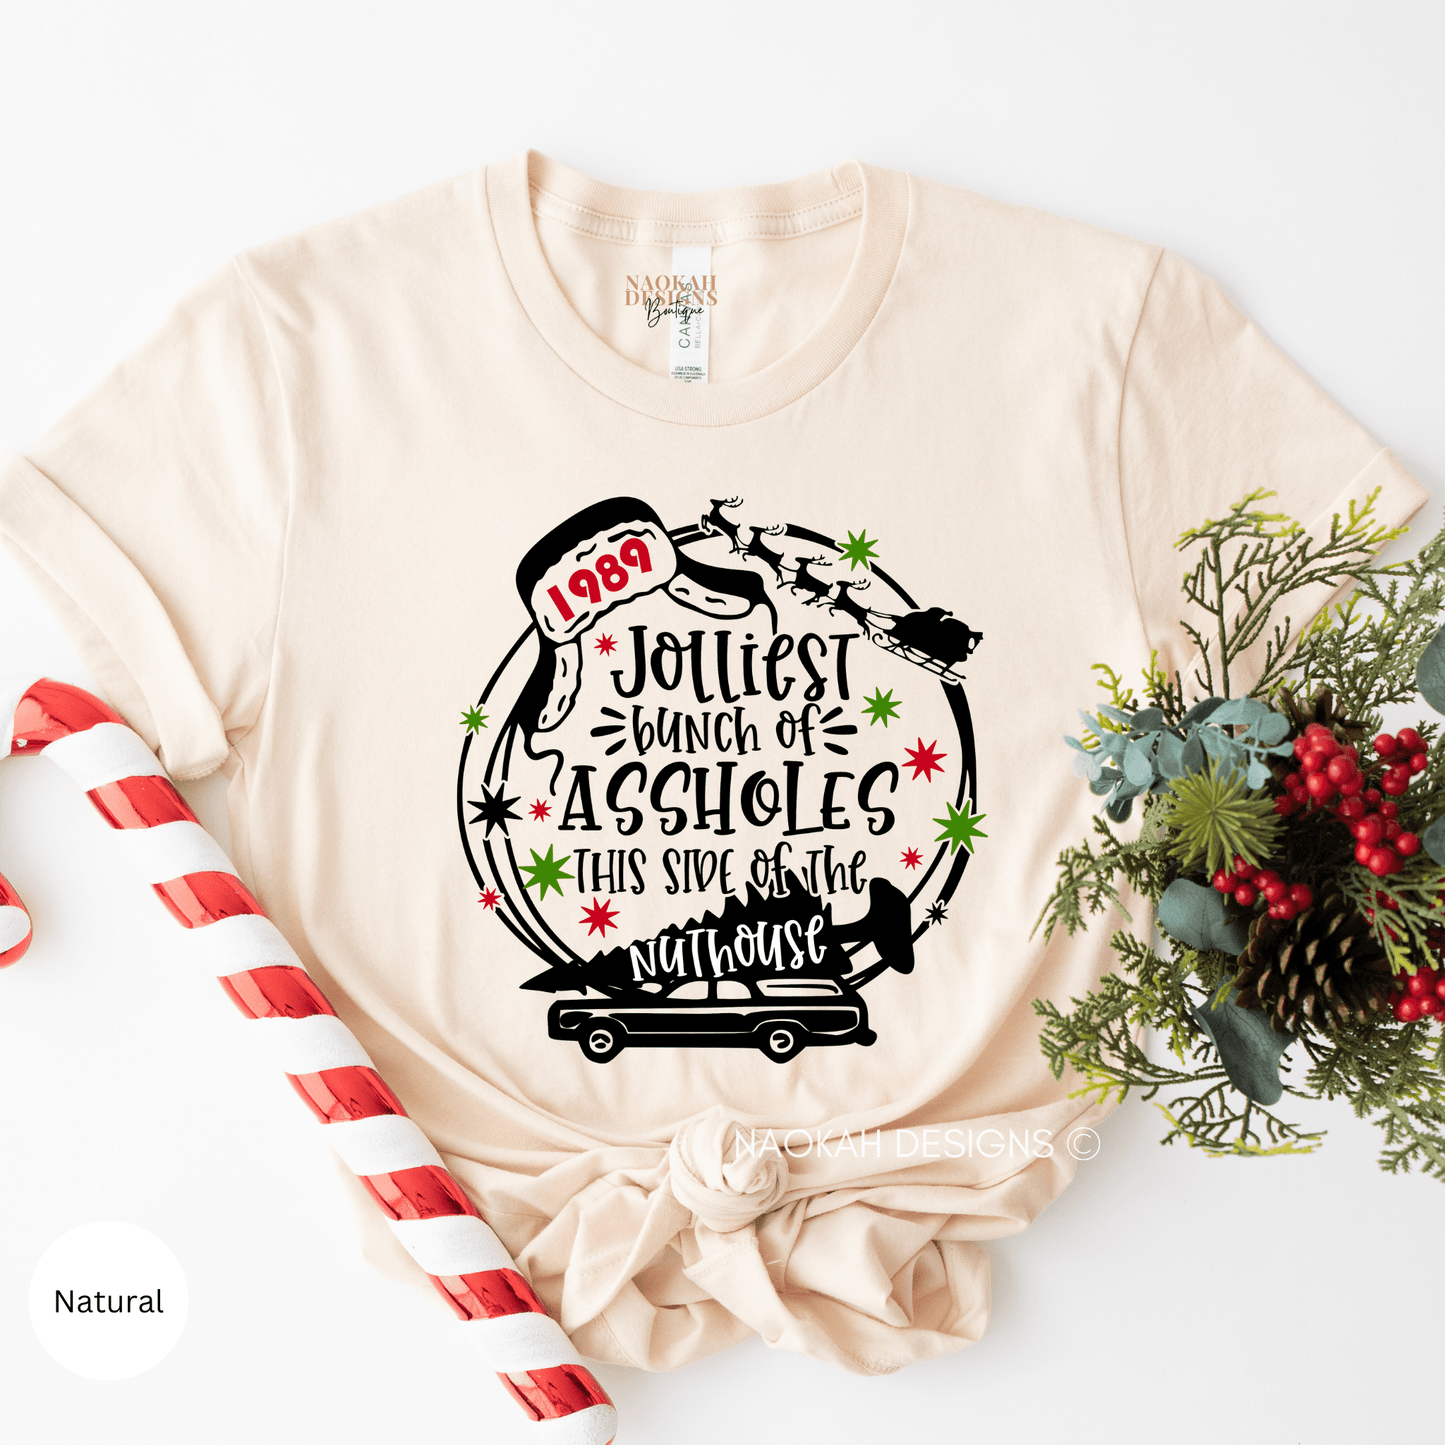 jolliest bunch of assholes this side of the nuthouse shirt, christmas vacation shirt, 1989 christmas vacation shirt, real beaut shirt